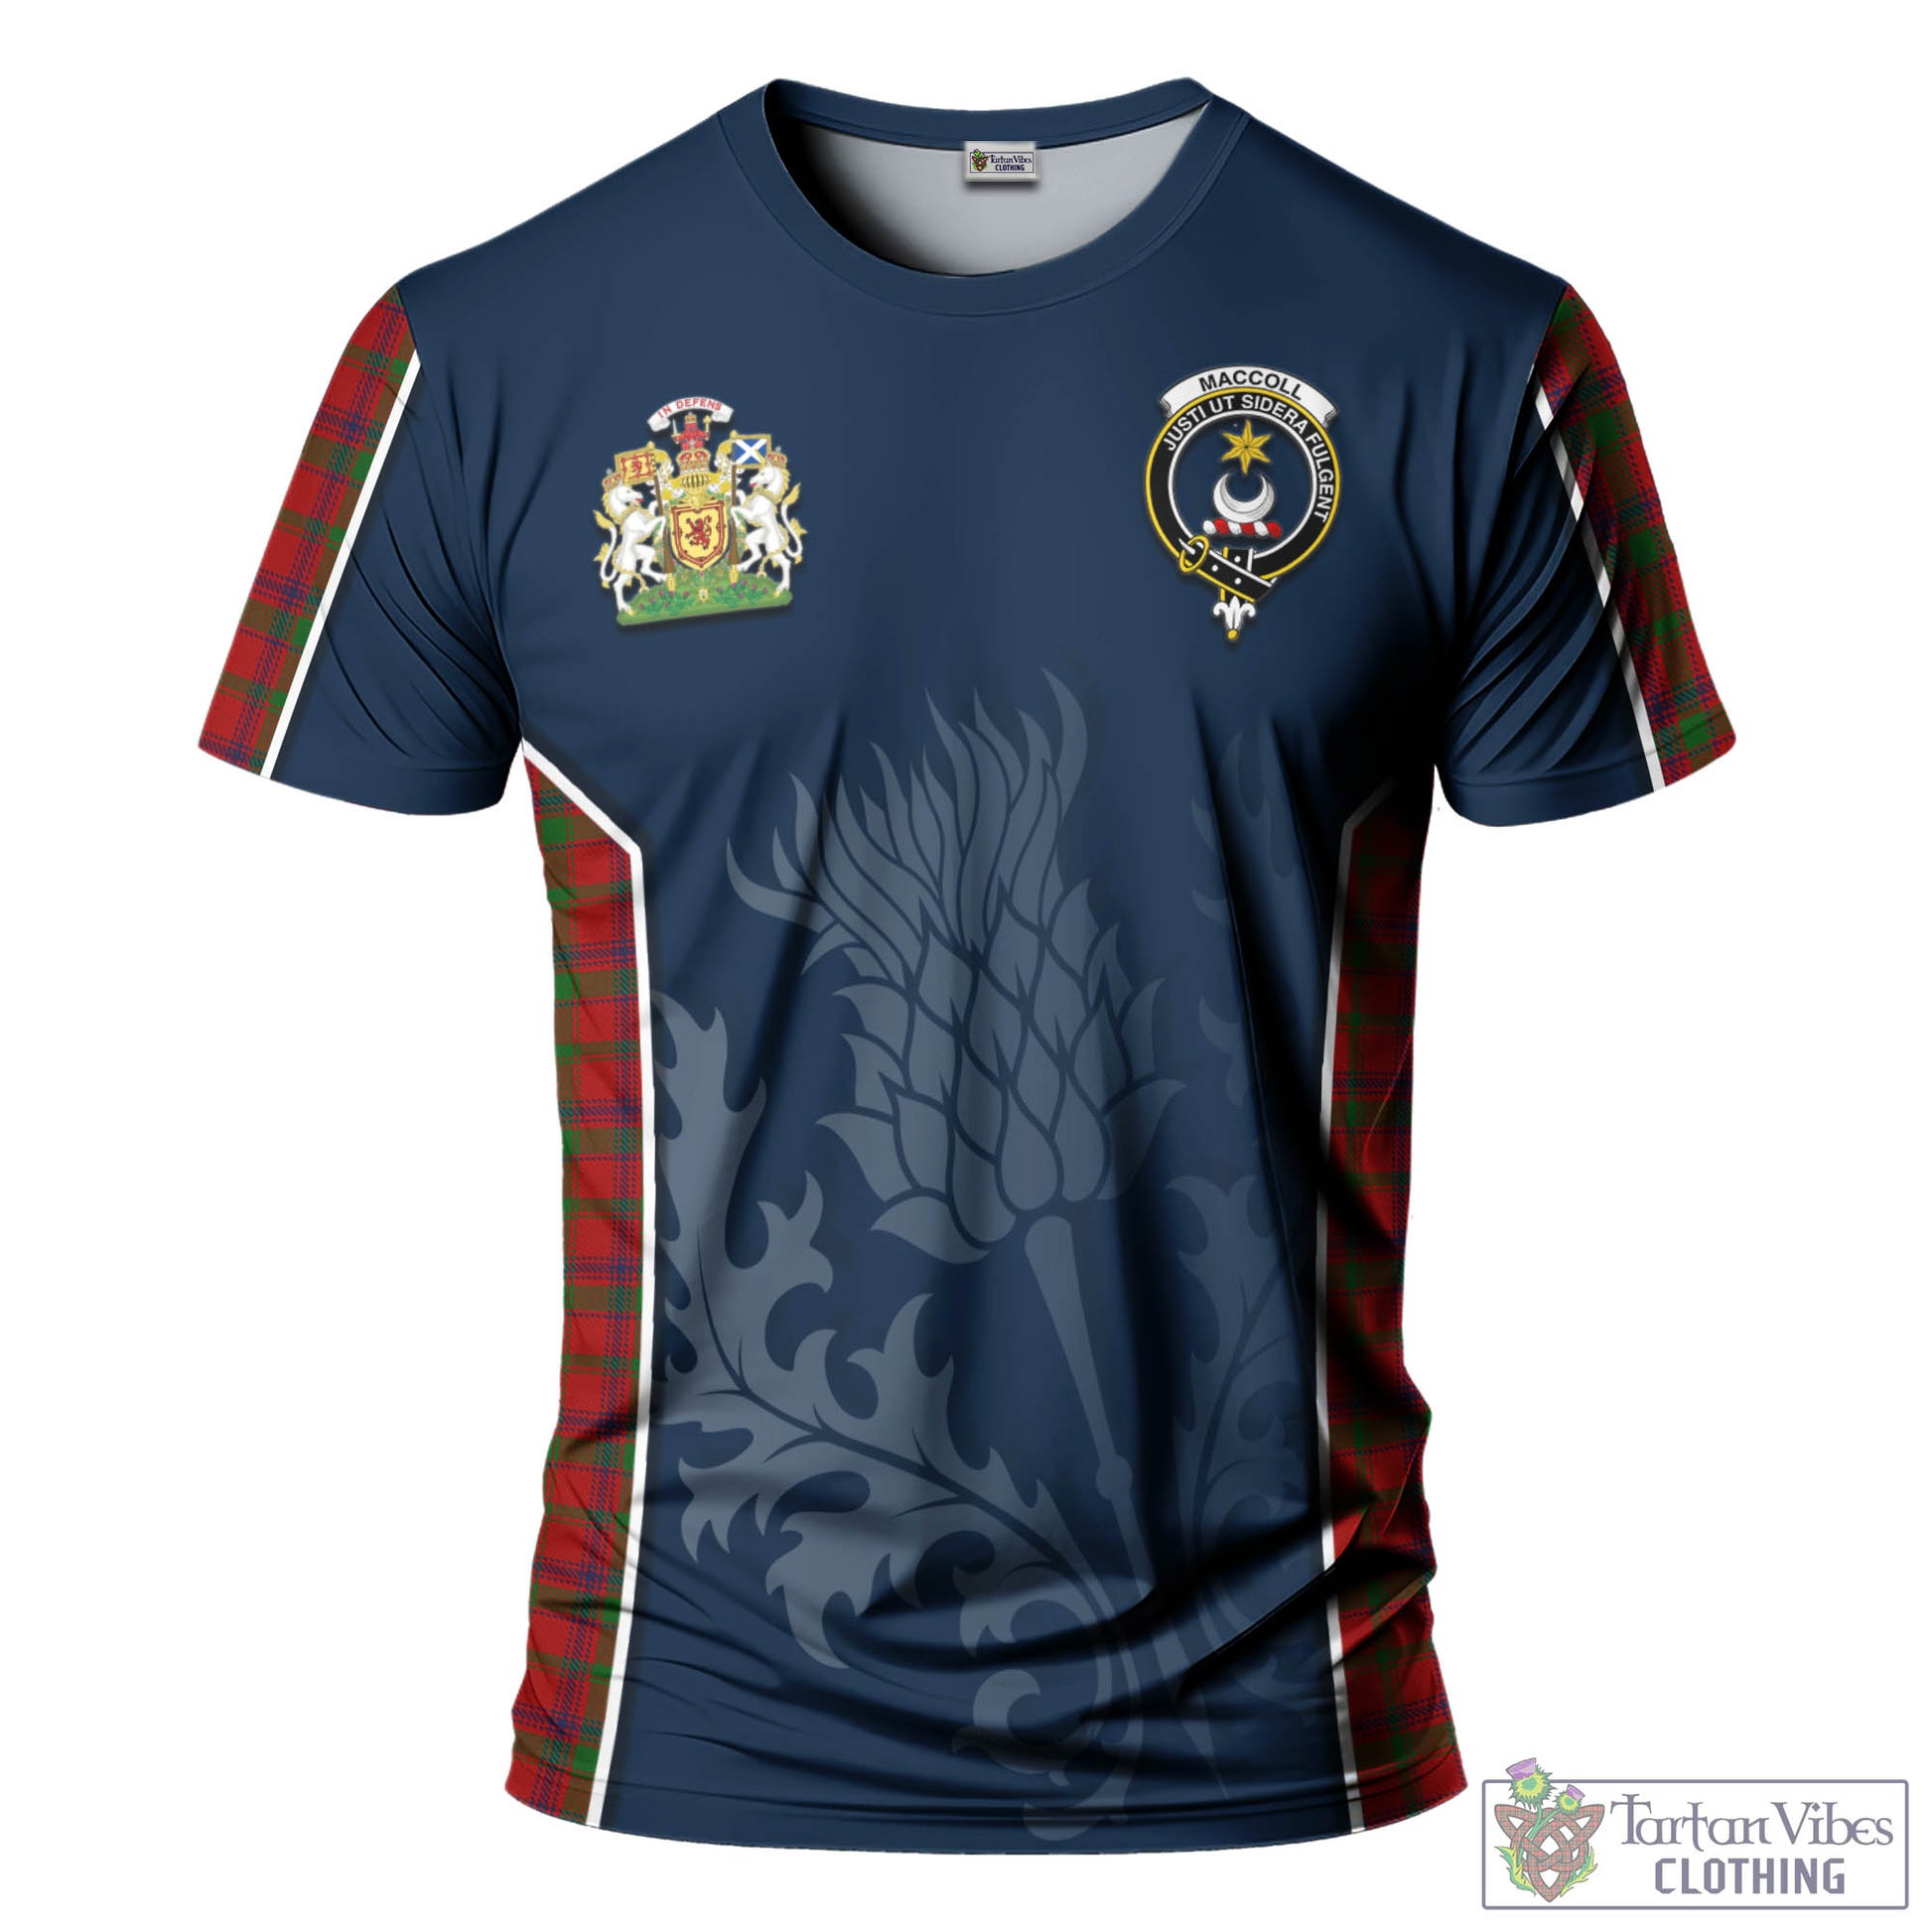 Tartan Vibes Clothing MacColl Tartan T-Shirt with Family Crest and Scottish Thistle Vibes Sport Style